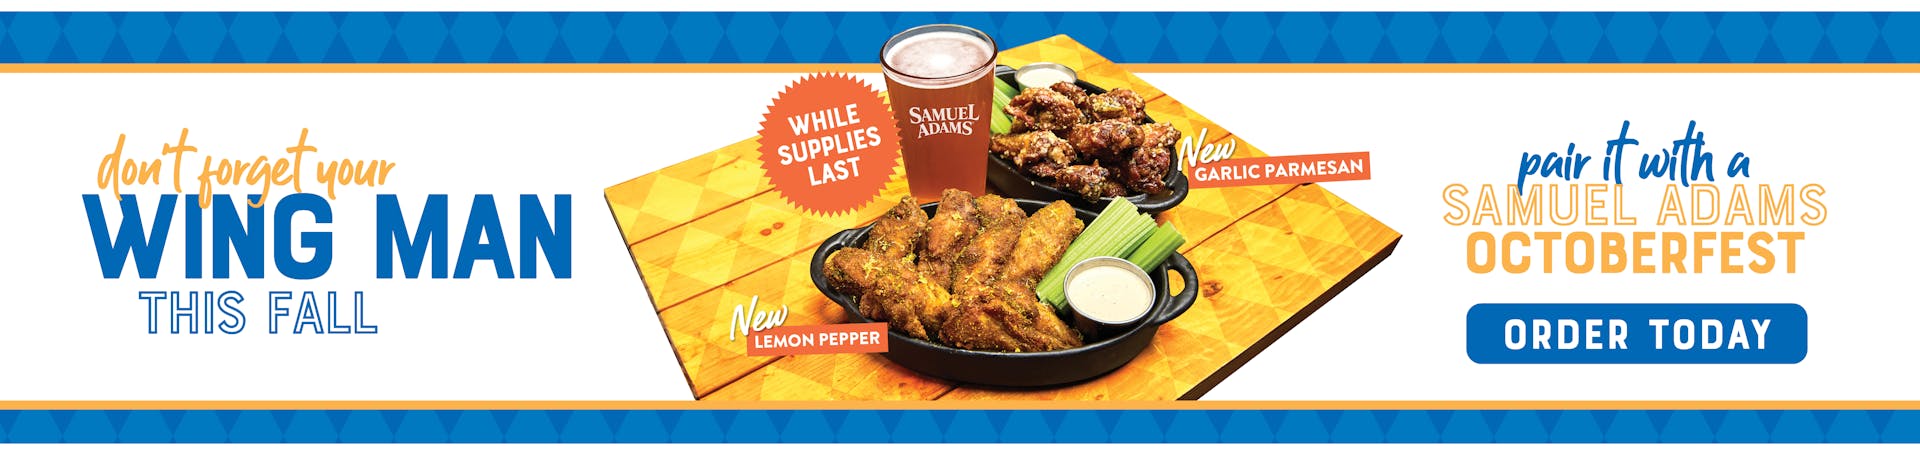 Image of two new wing flavors, garlic parmesan and lemon pepper, paired with a Sam Adams Oktoberfest Beer, Don't forget your Wing Man This Fall. Pair it with a Samuel Adams Octoberfest. Order Today